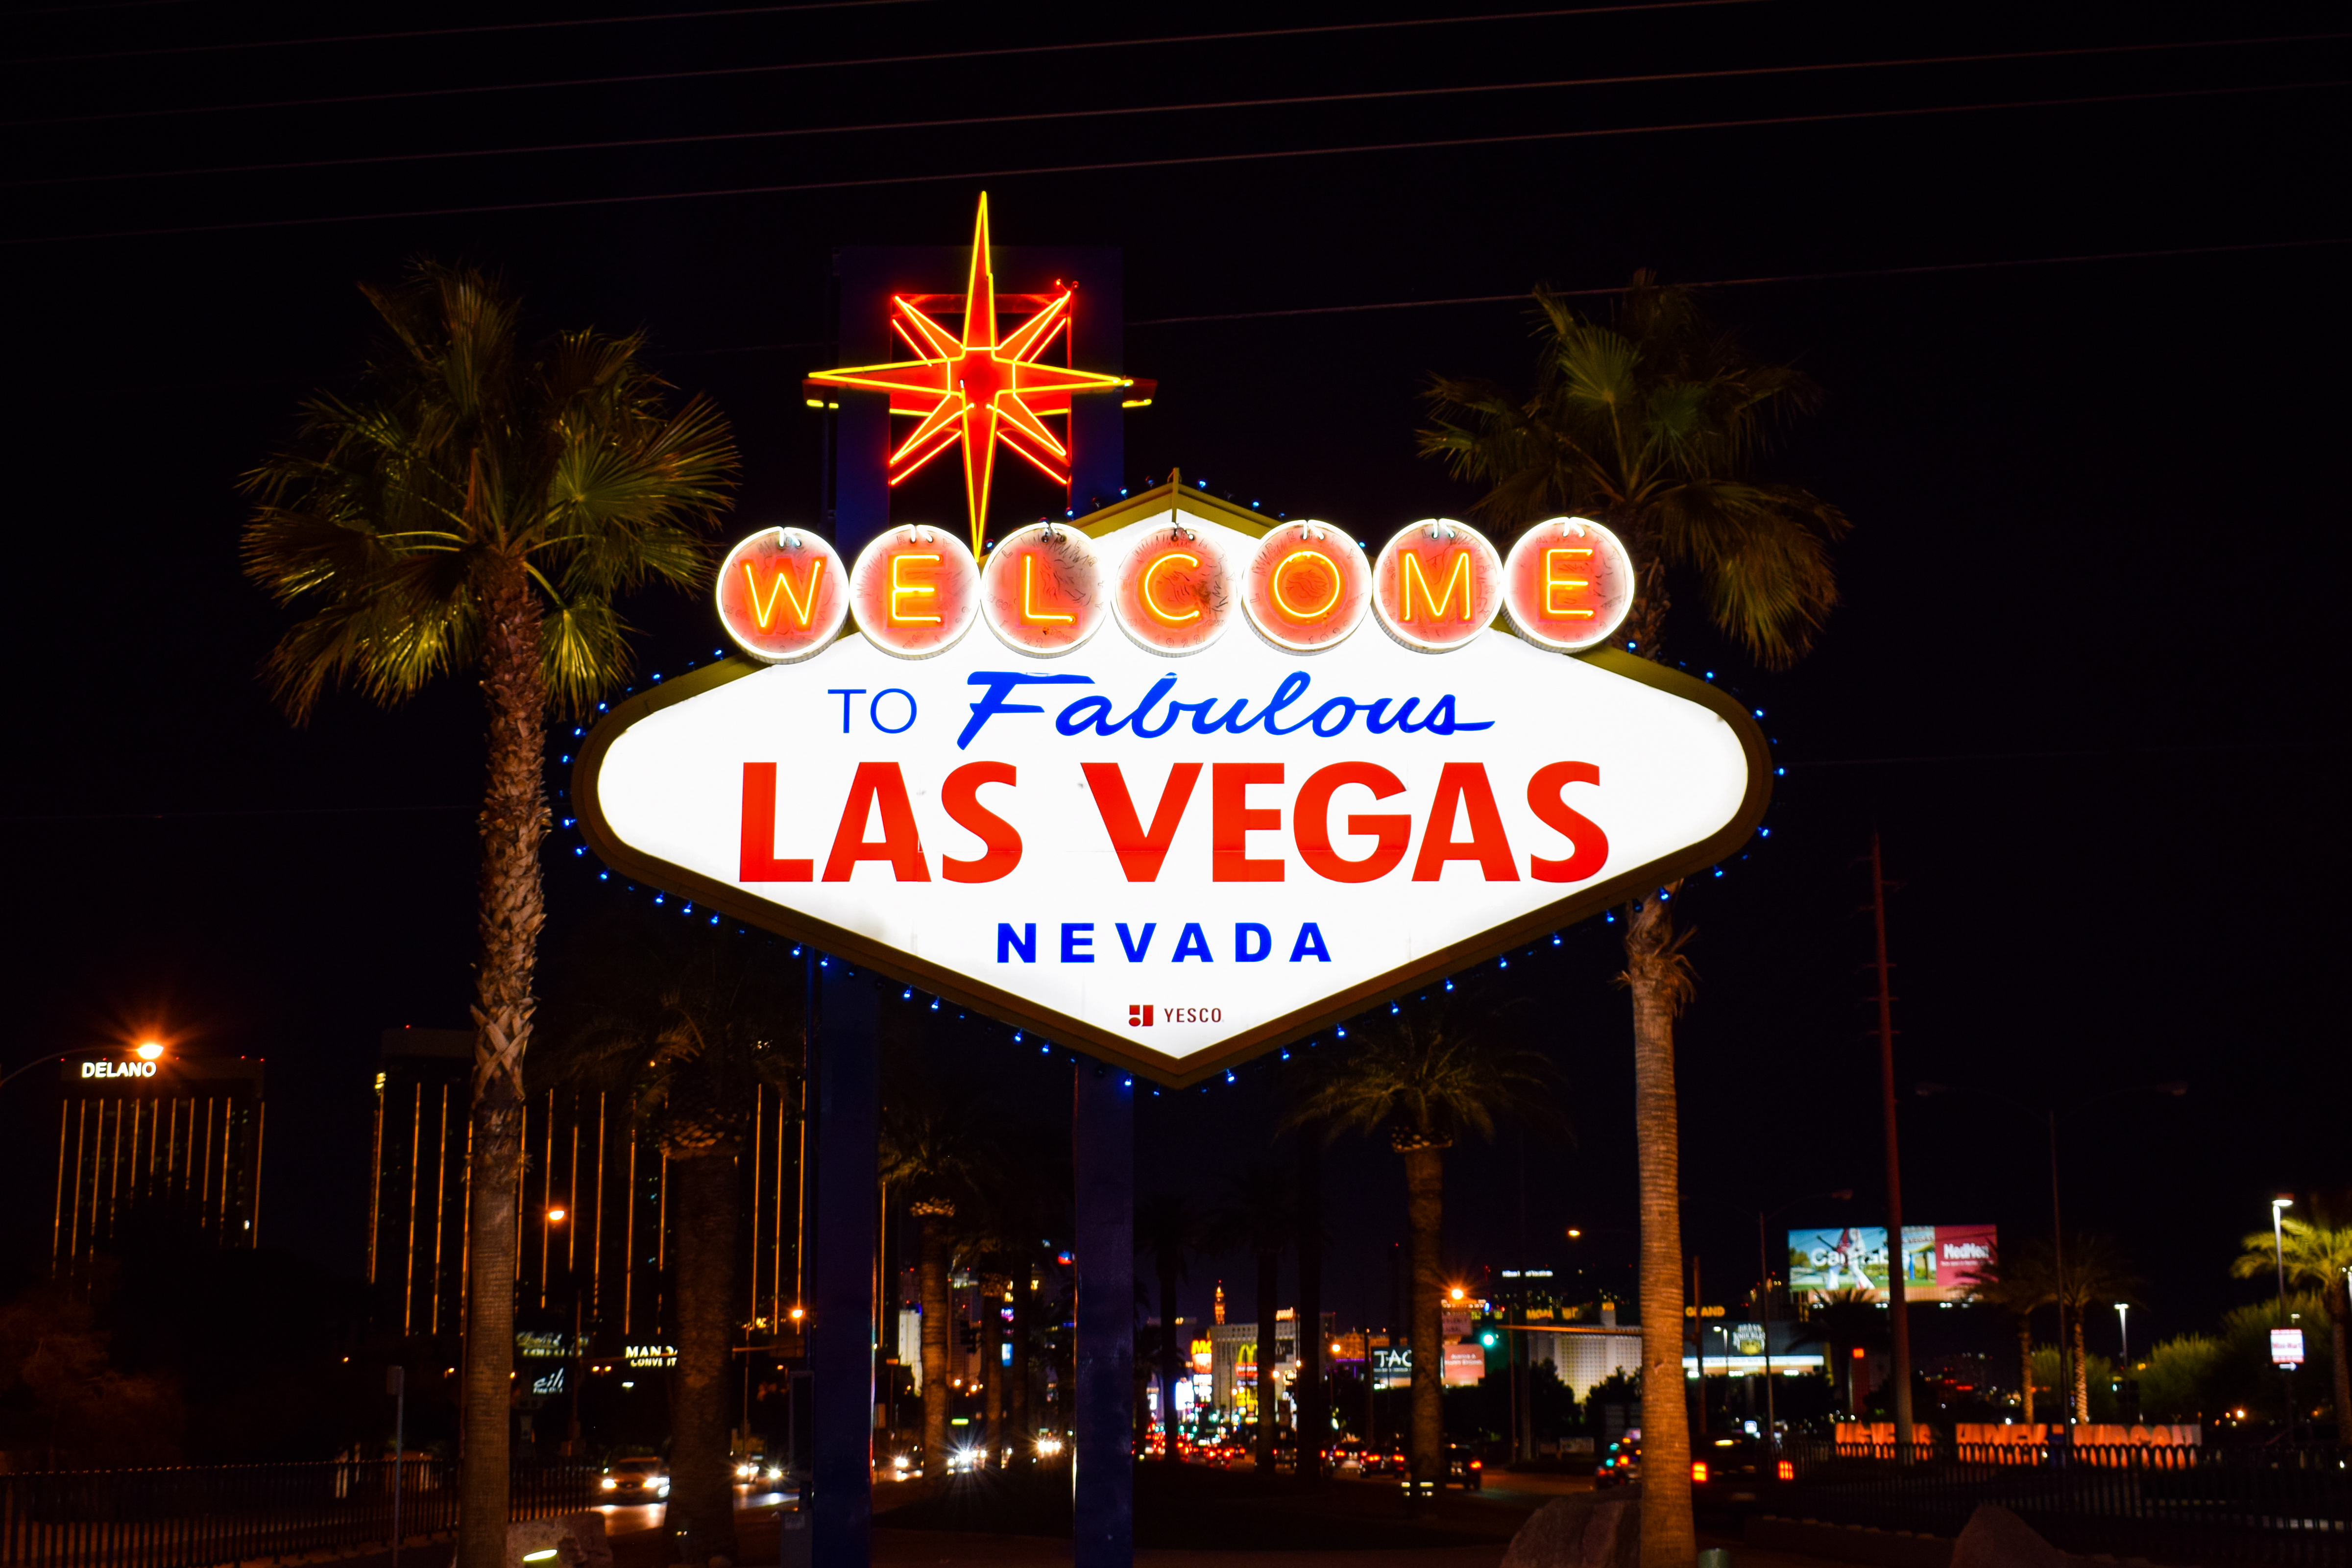 The "Las Vegas" sign stands out in the night. 